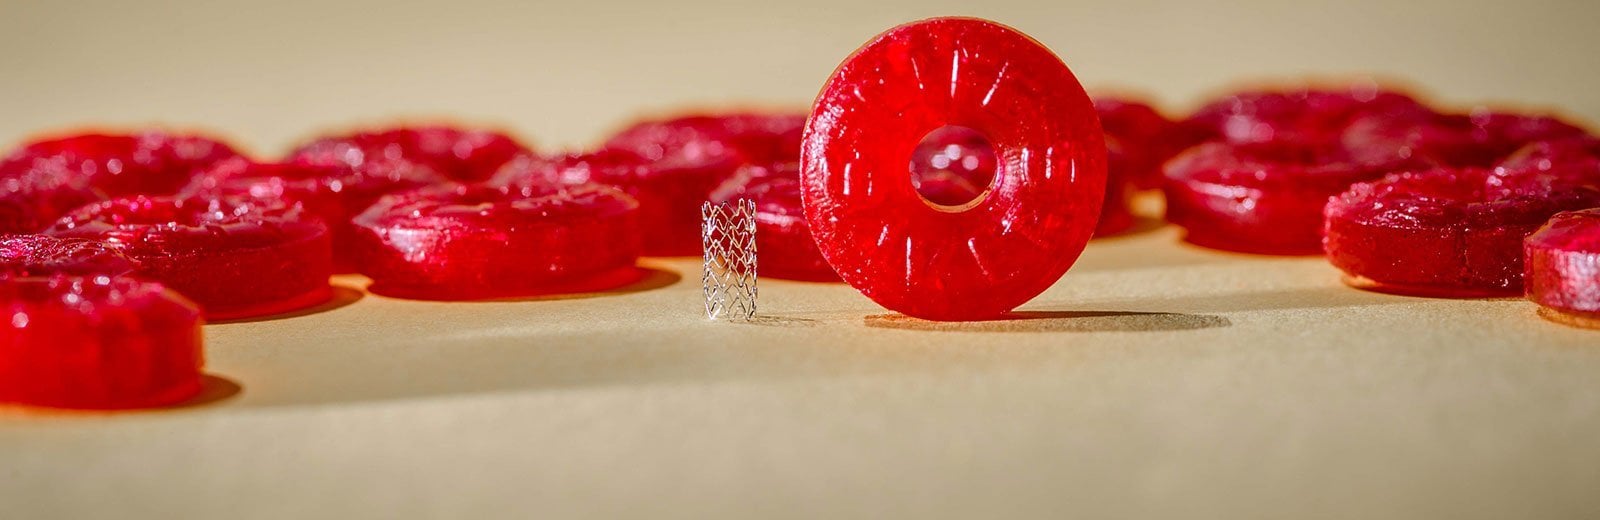 A zinc stent next to a Life Saver candy for a sense of scale.